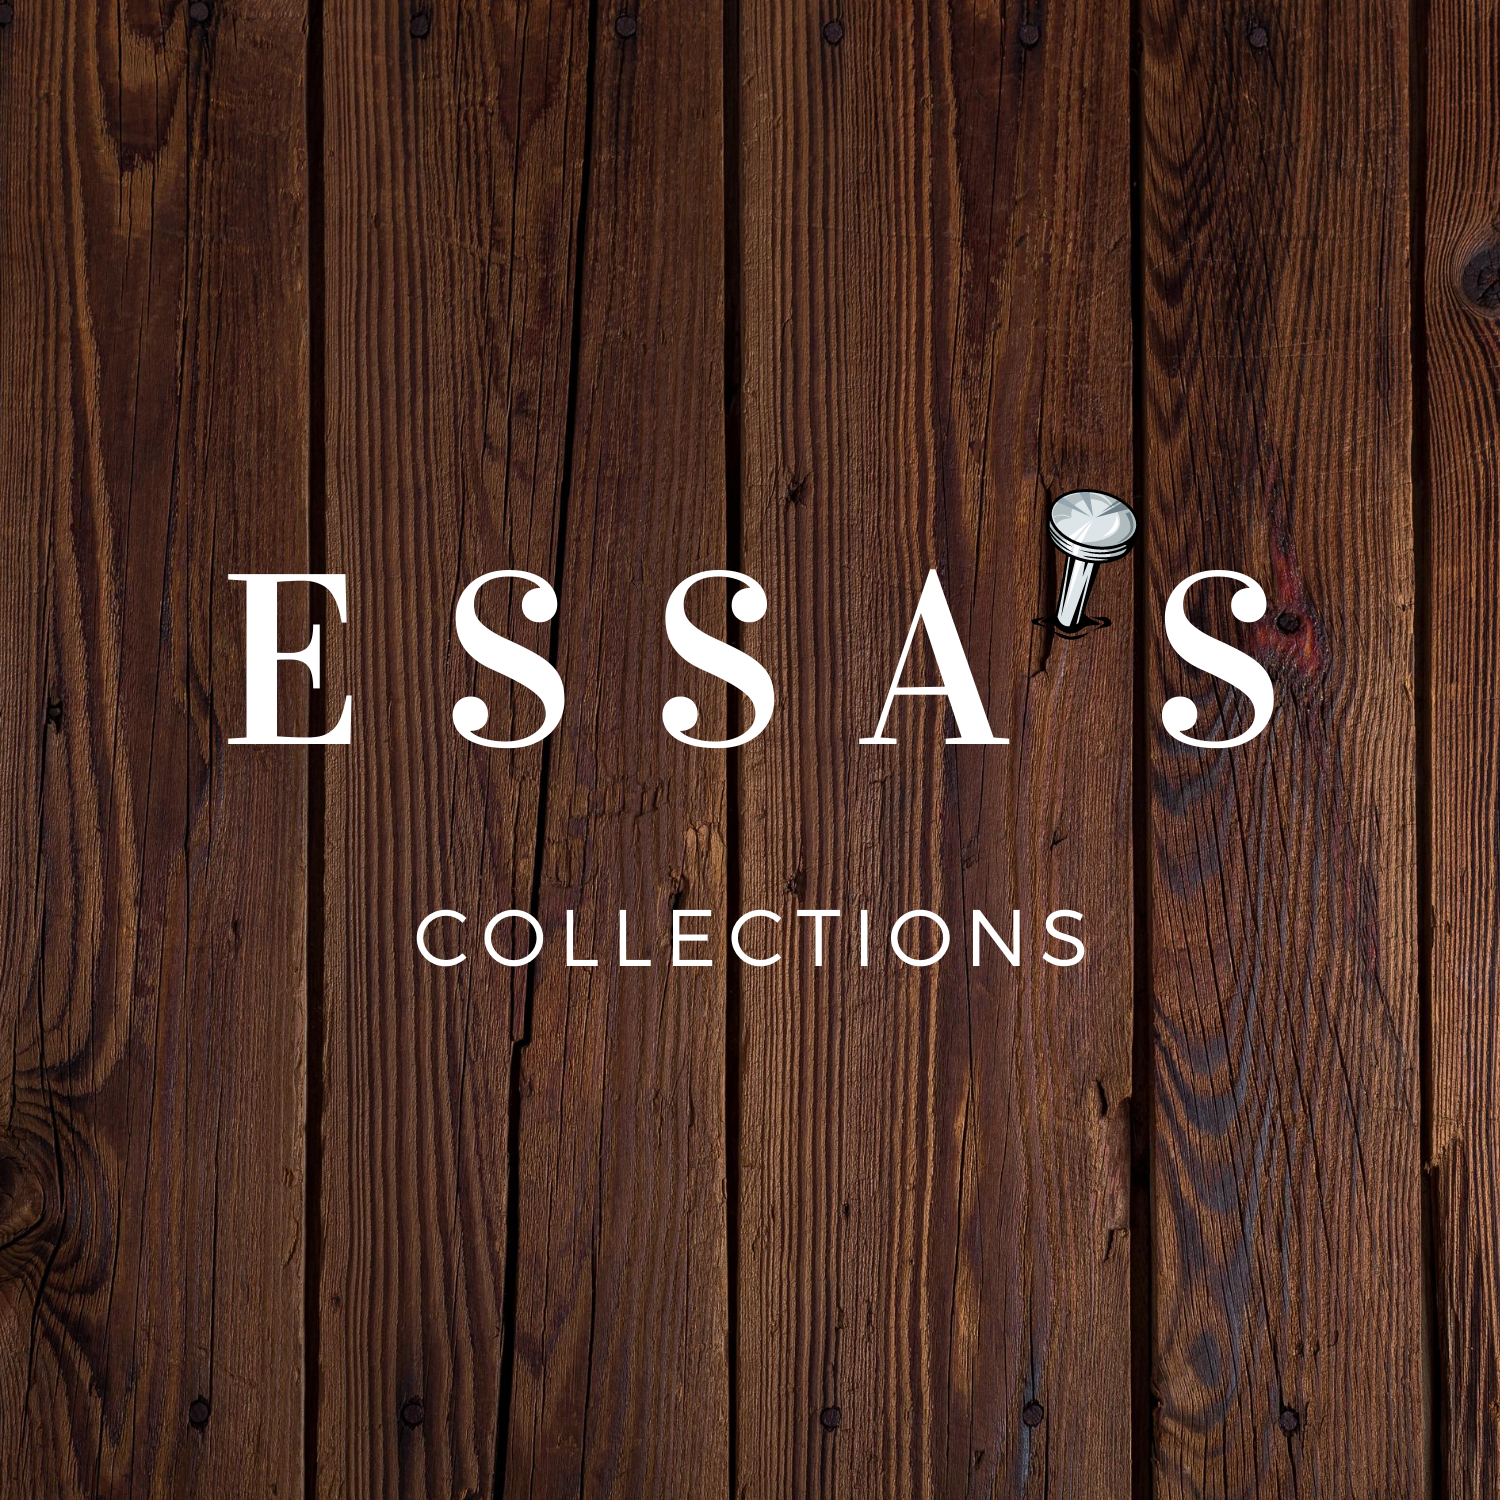 Essa’s Collections